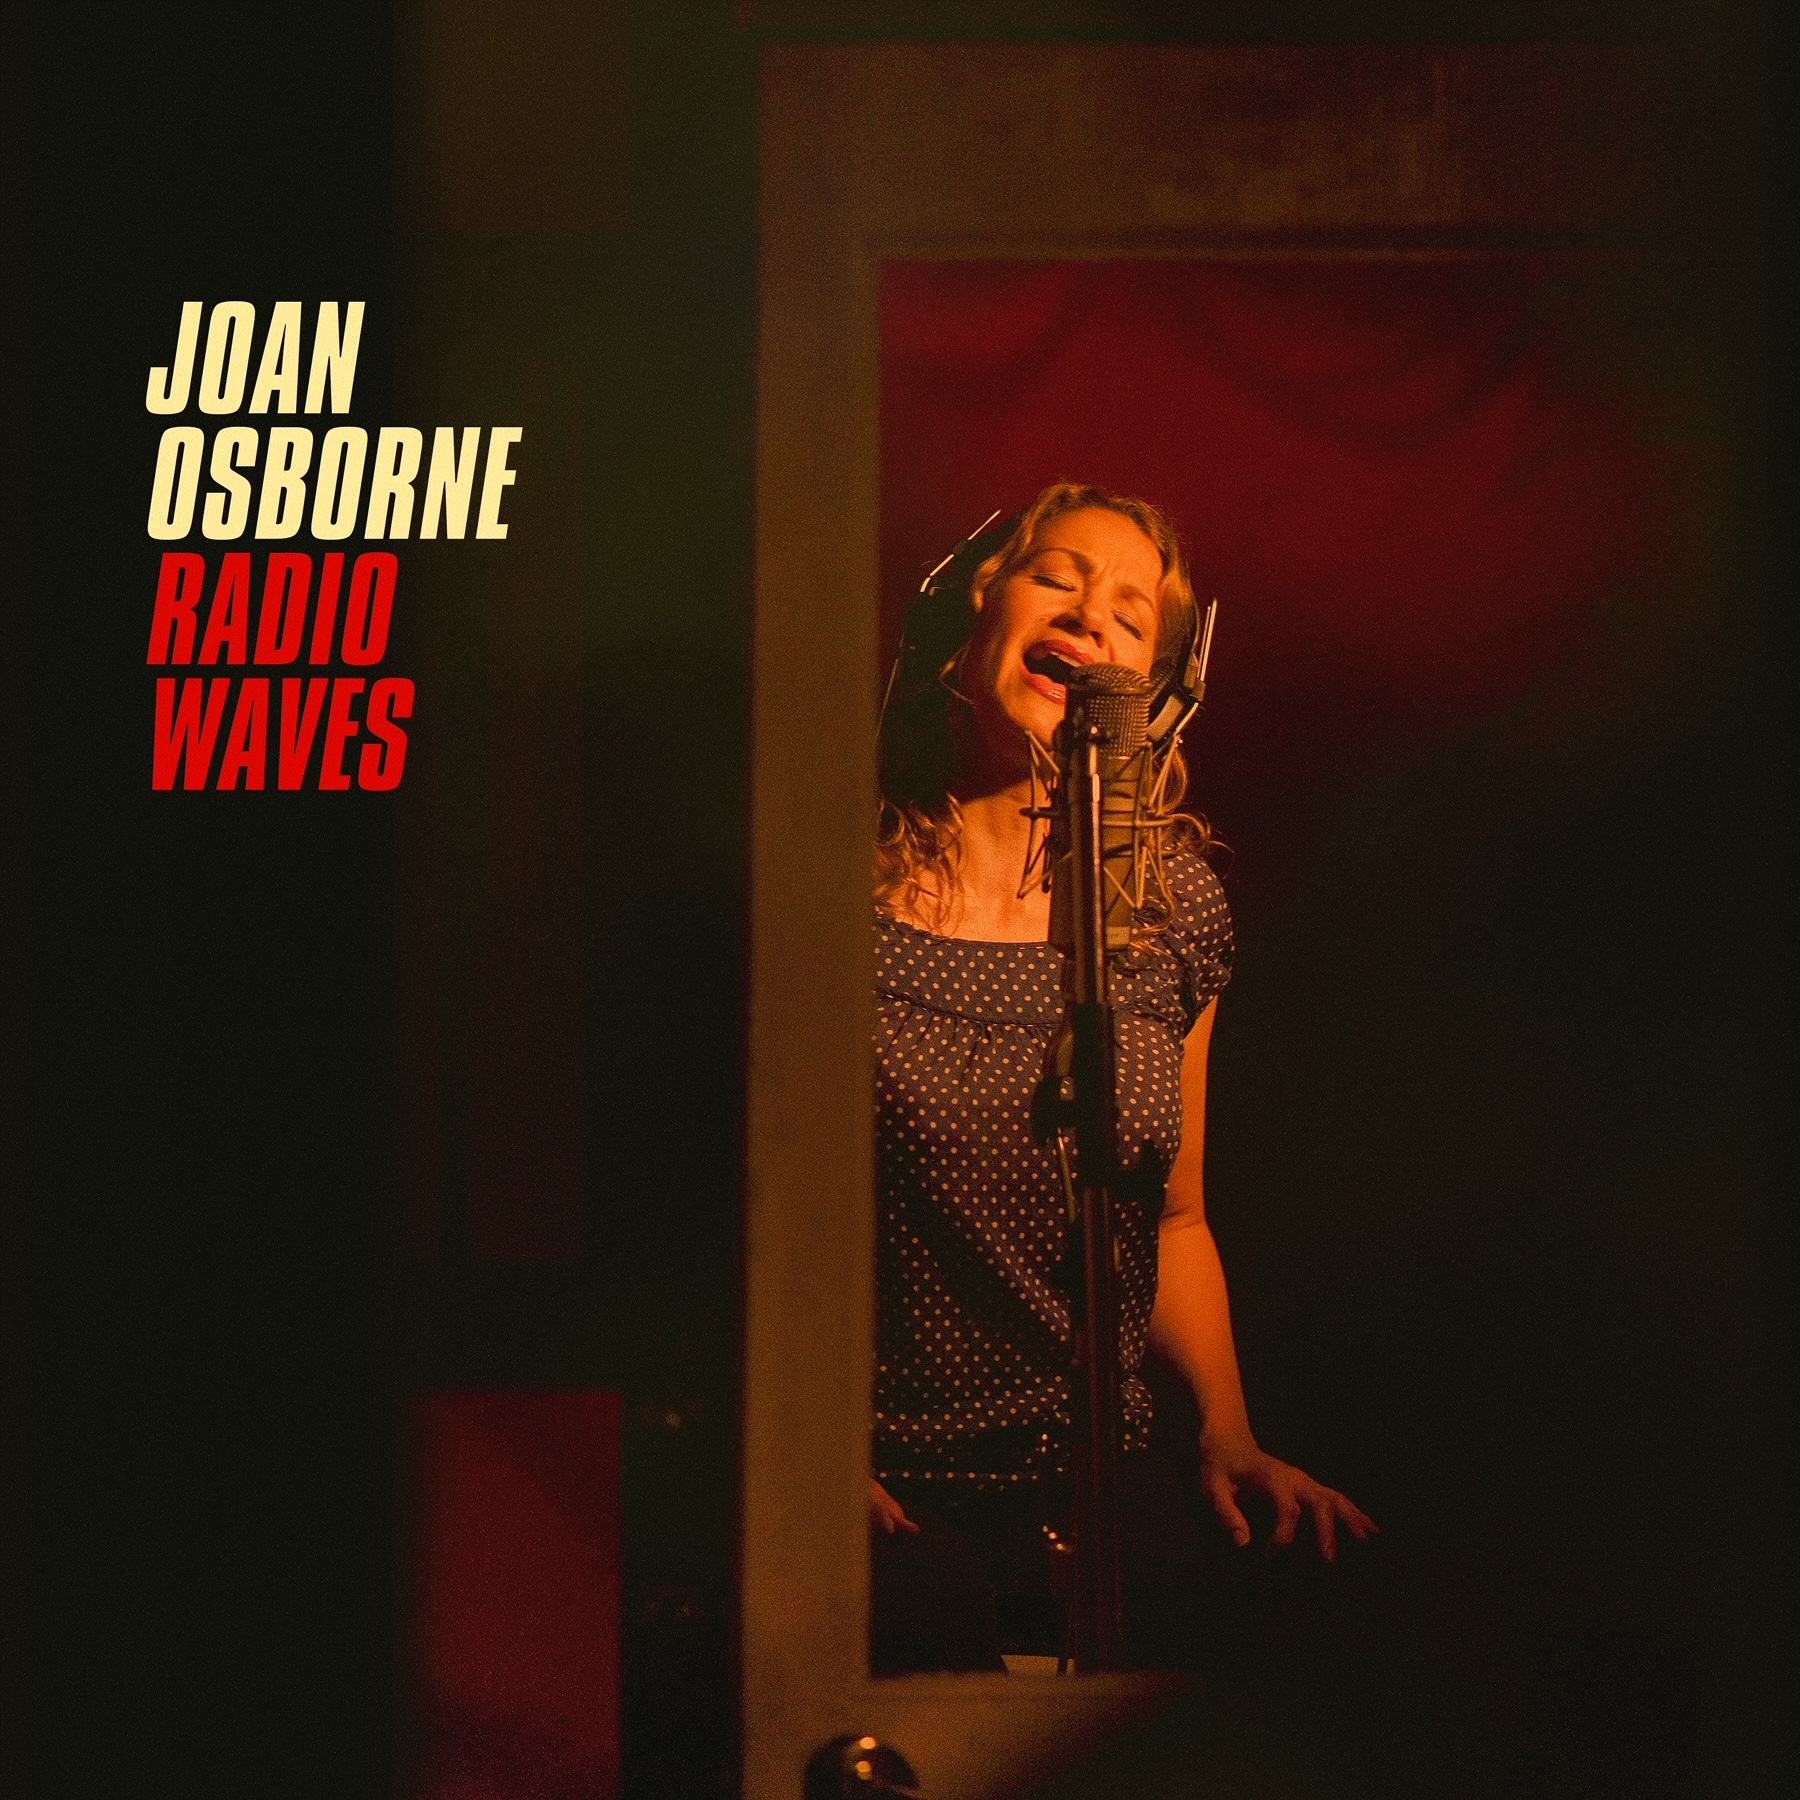 The cover of Joan Osborne's album Radio Waves. Osborne performs at The Talkhouse on July 31.